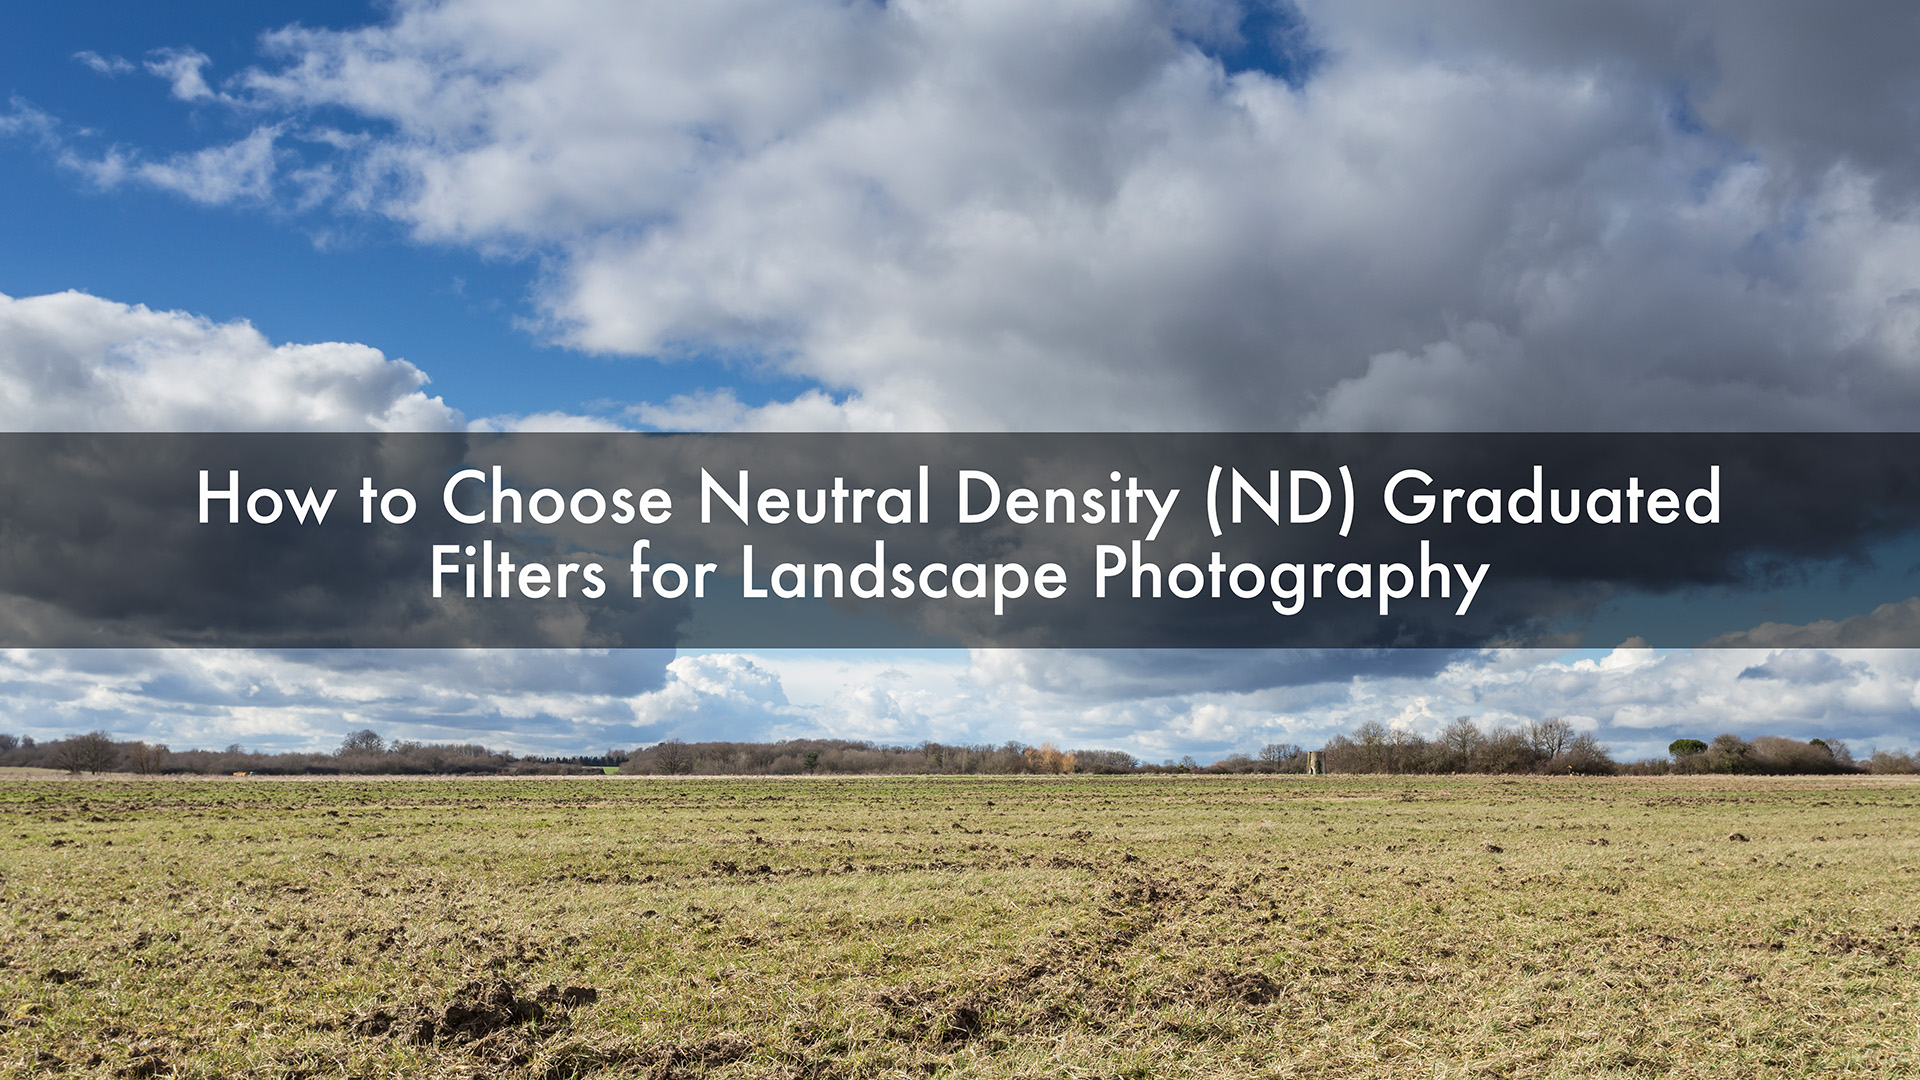 how to use and choose the correct neutral density (ND) grad/ graduated filter for landscape photography.